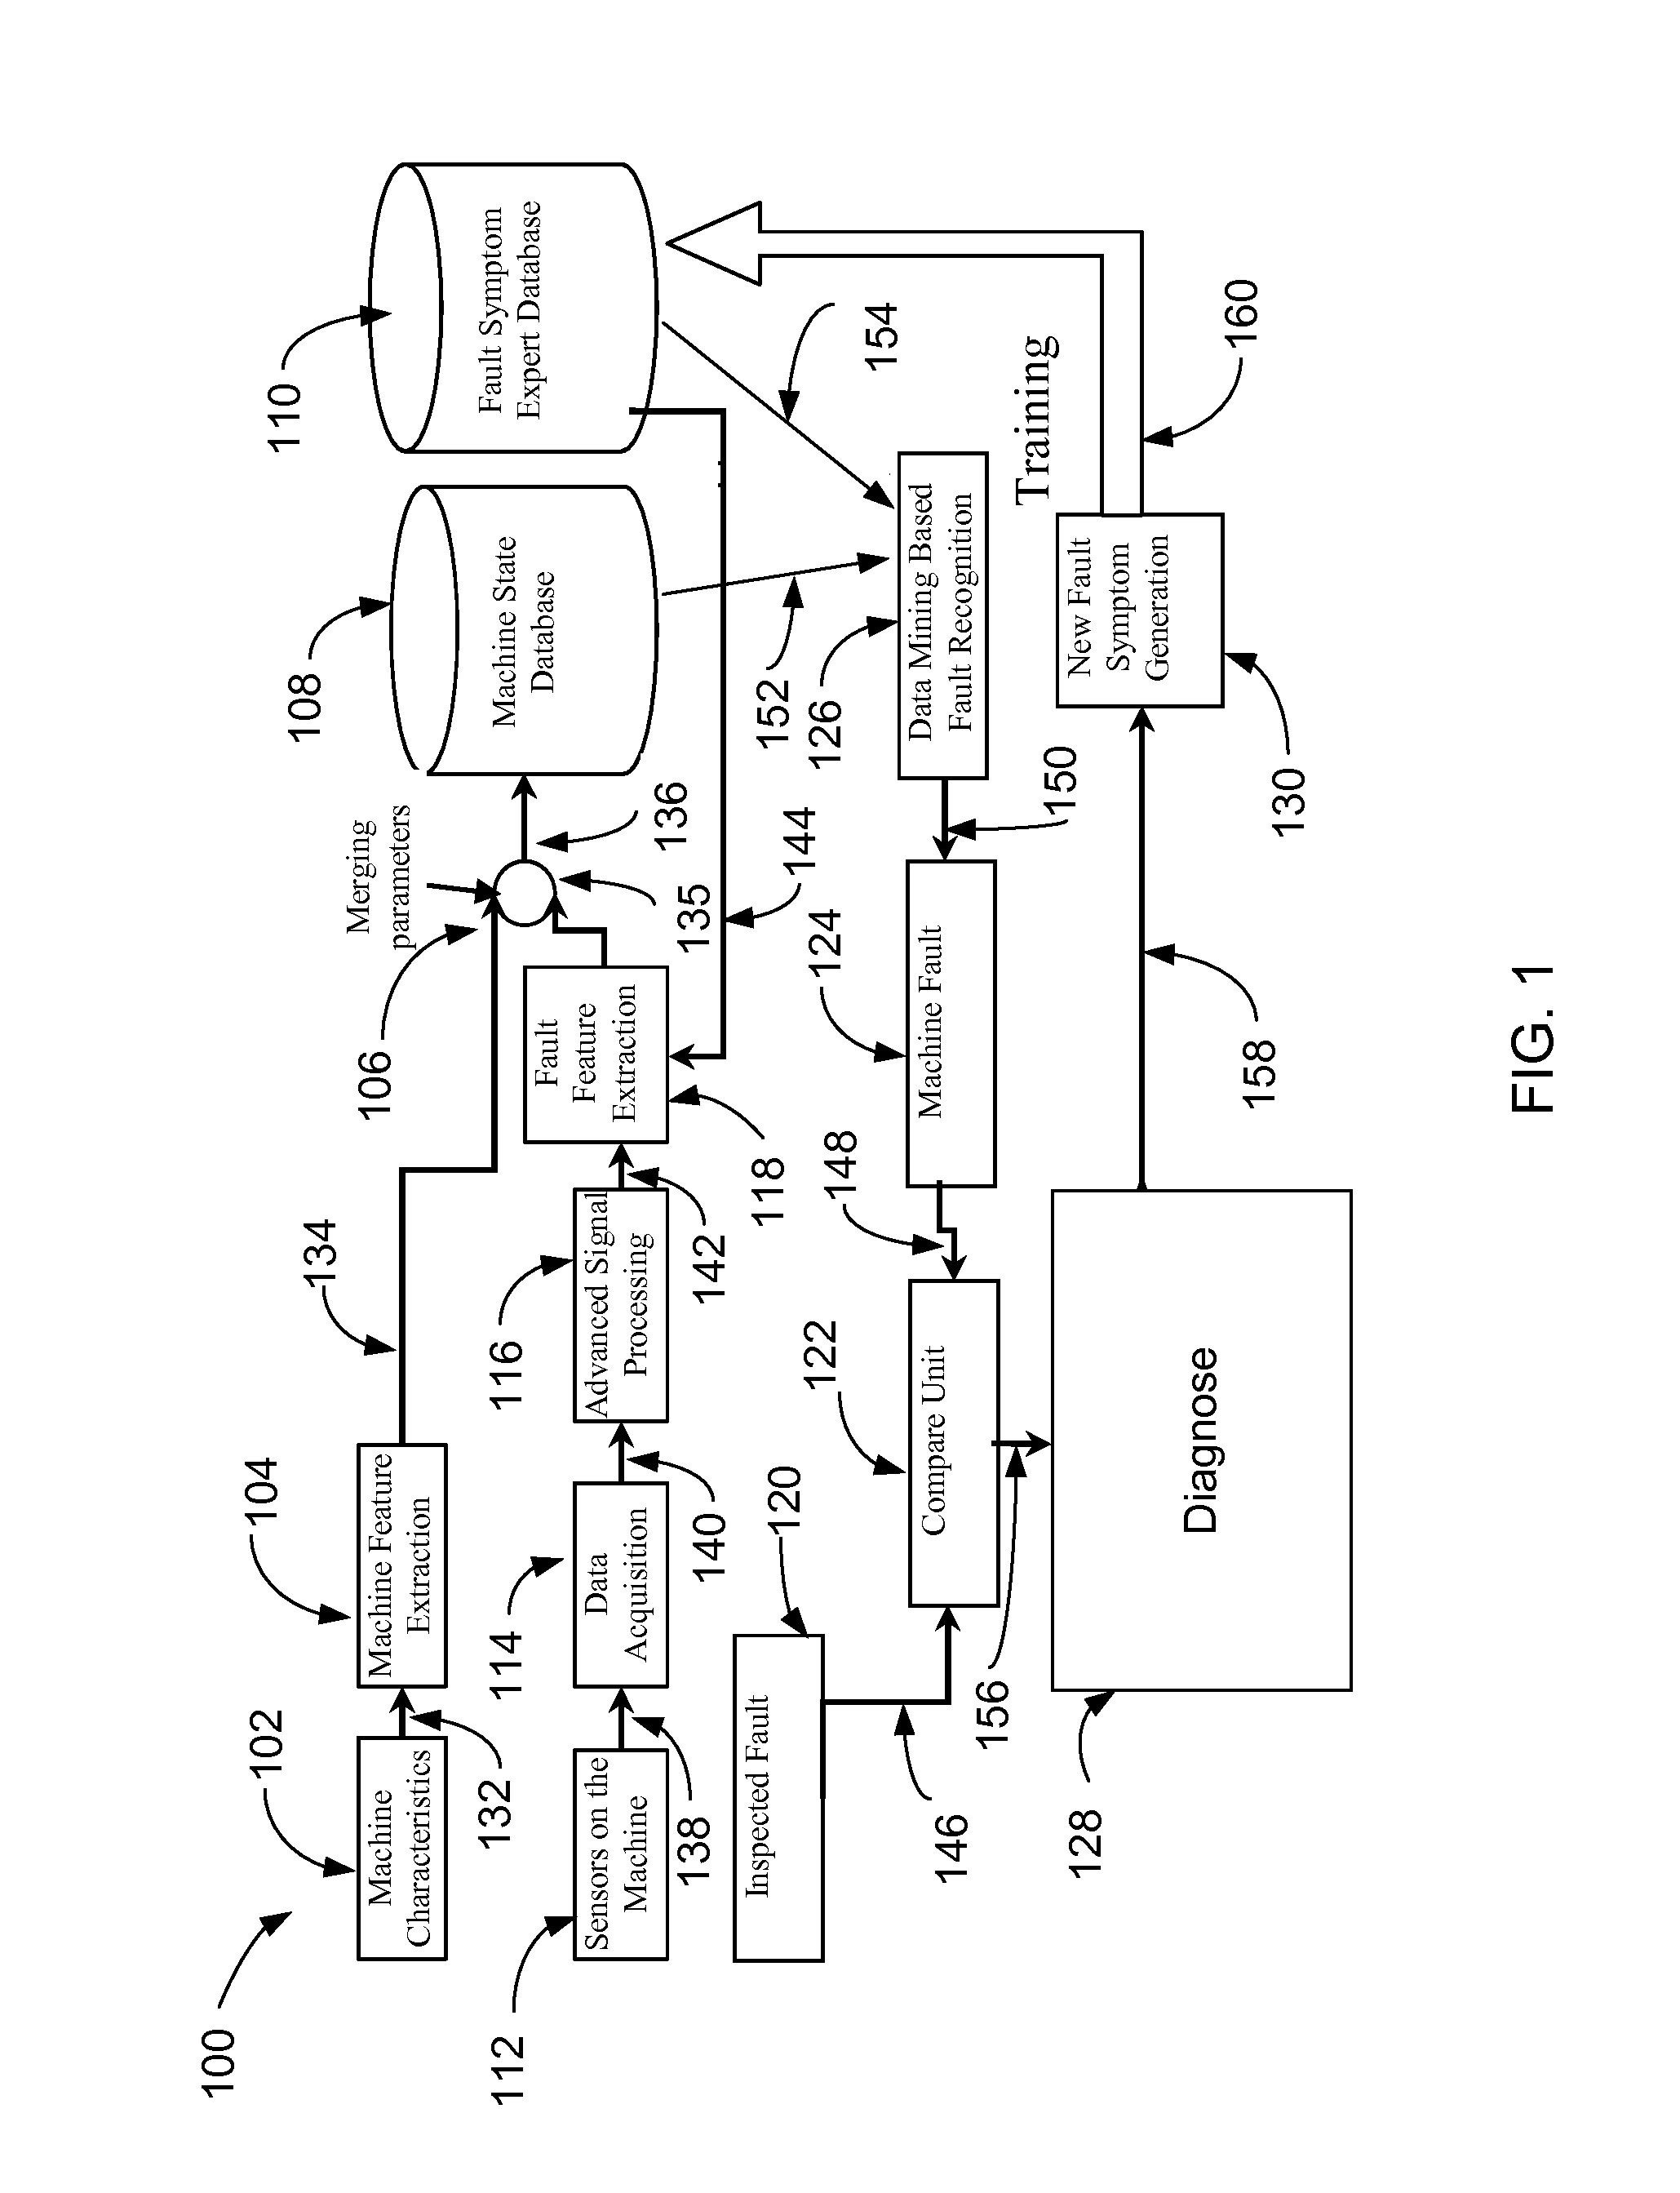 Method and System for Predictive and Conditional Fault Detection